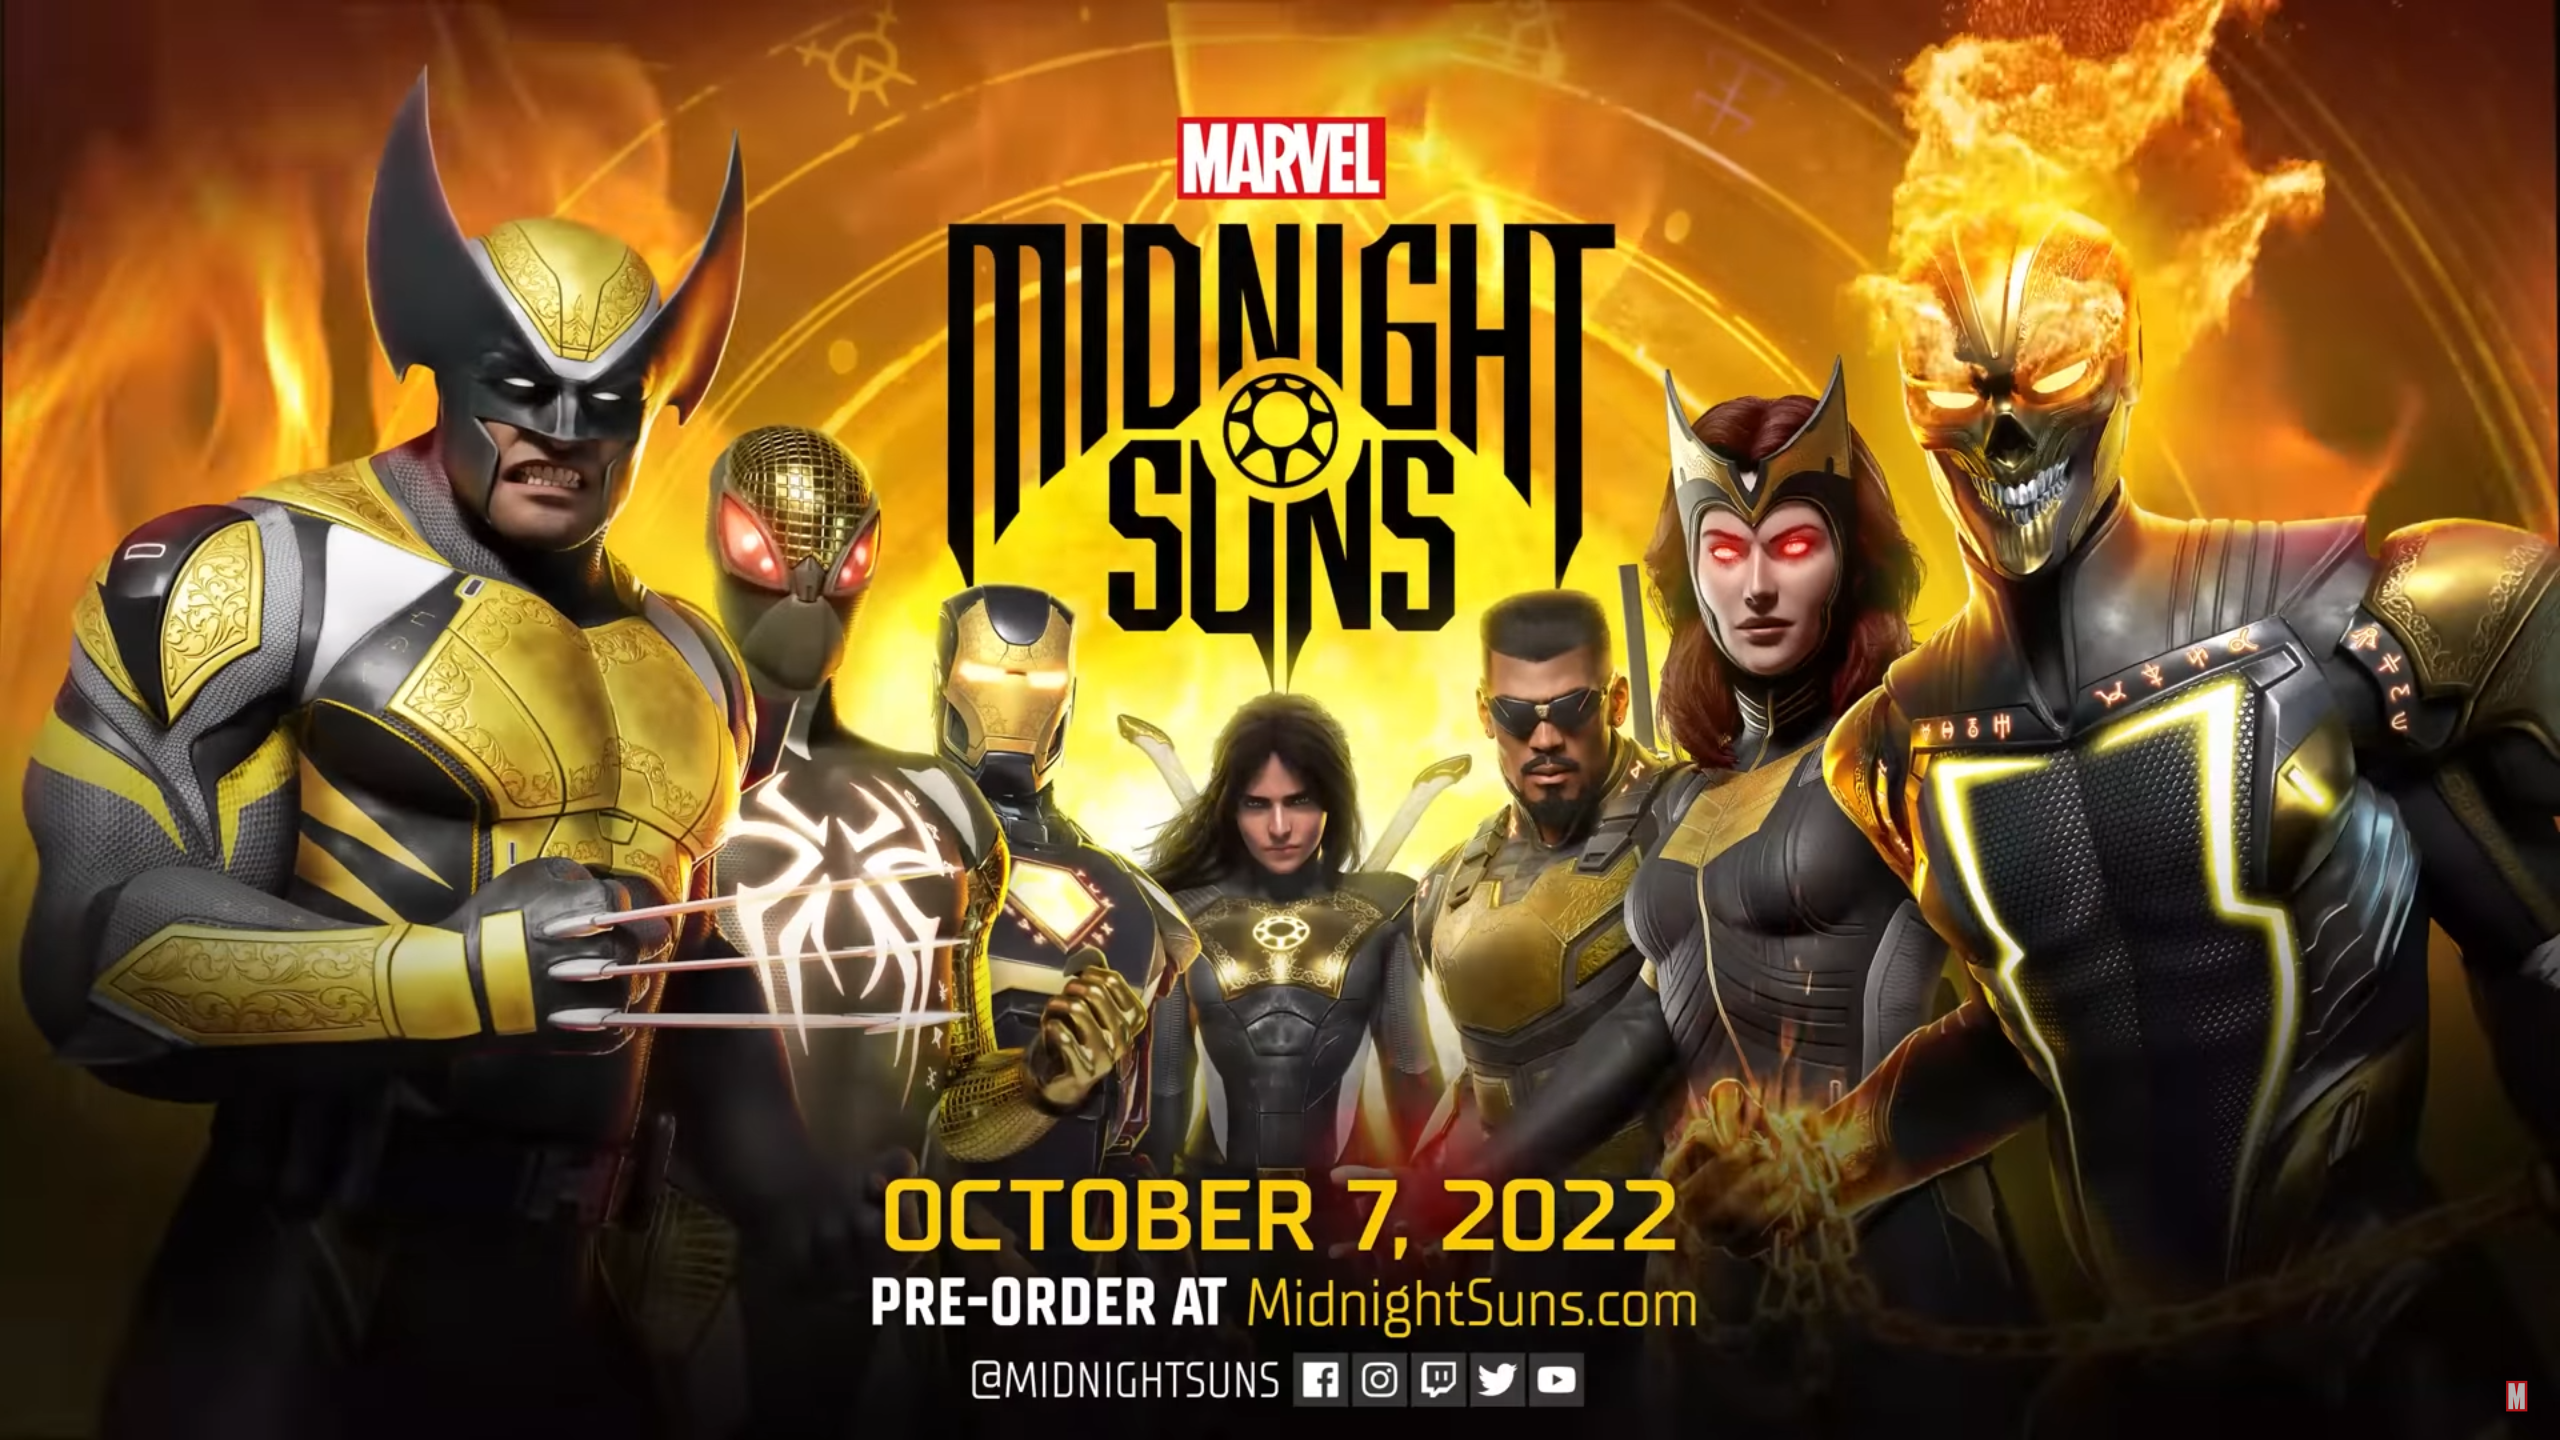 Marvel's Midnight Suns confirmed for an October 7 release on PC and consoles.net News